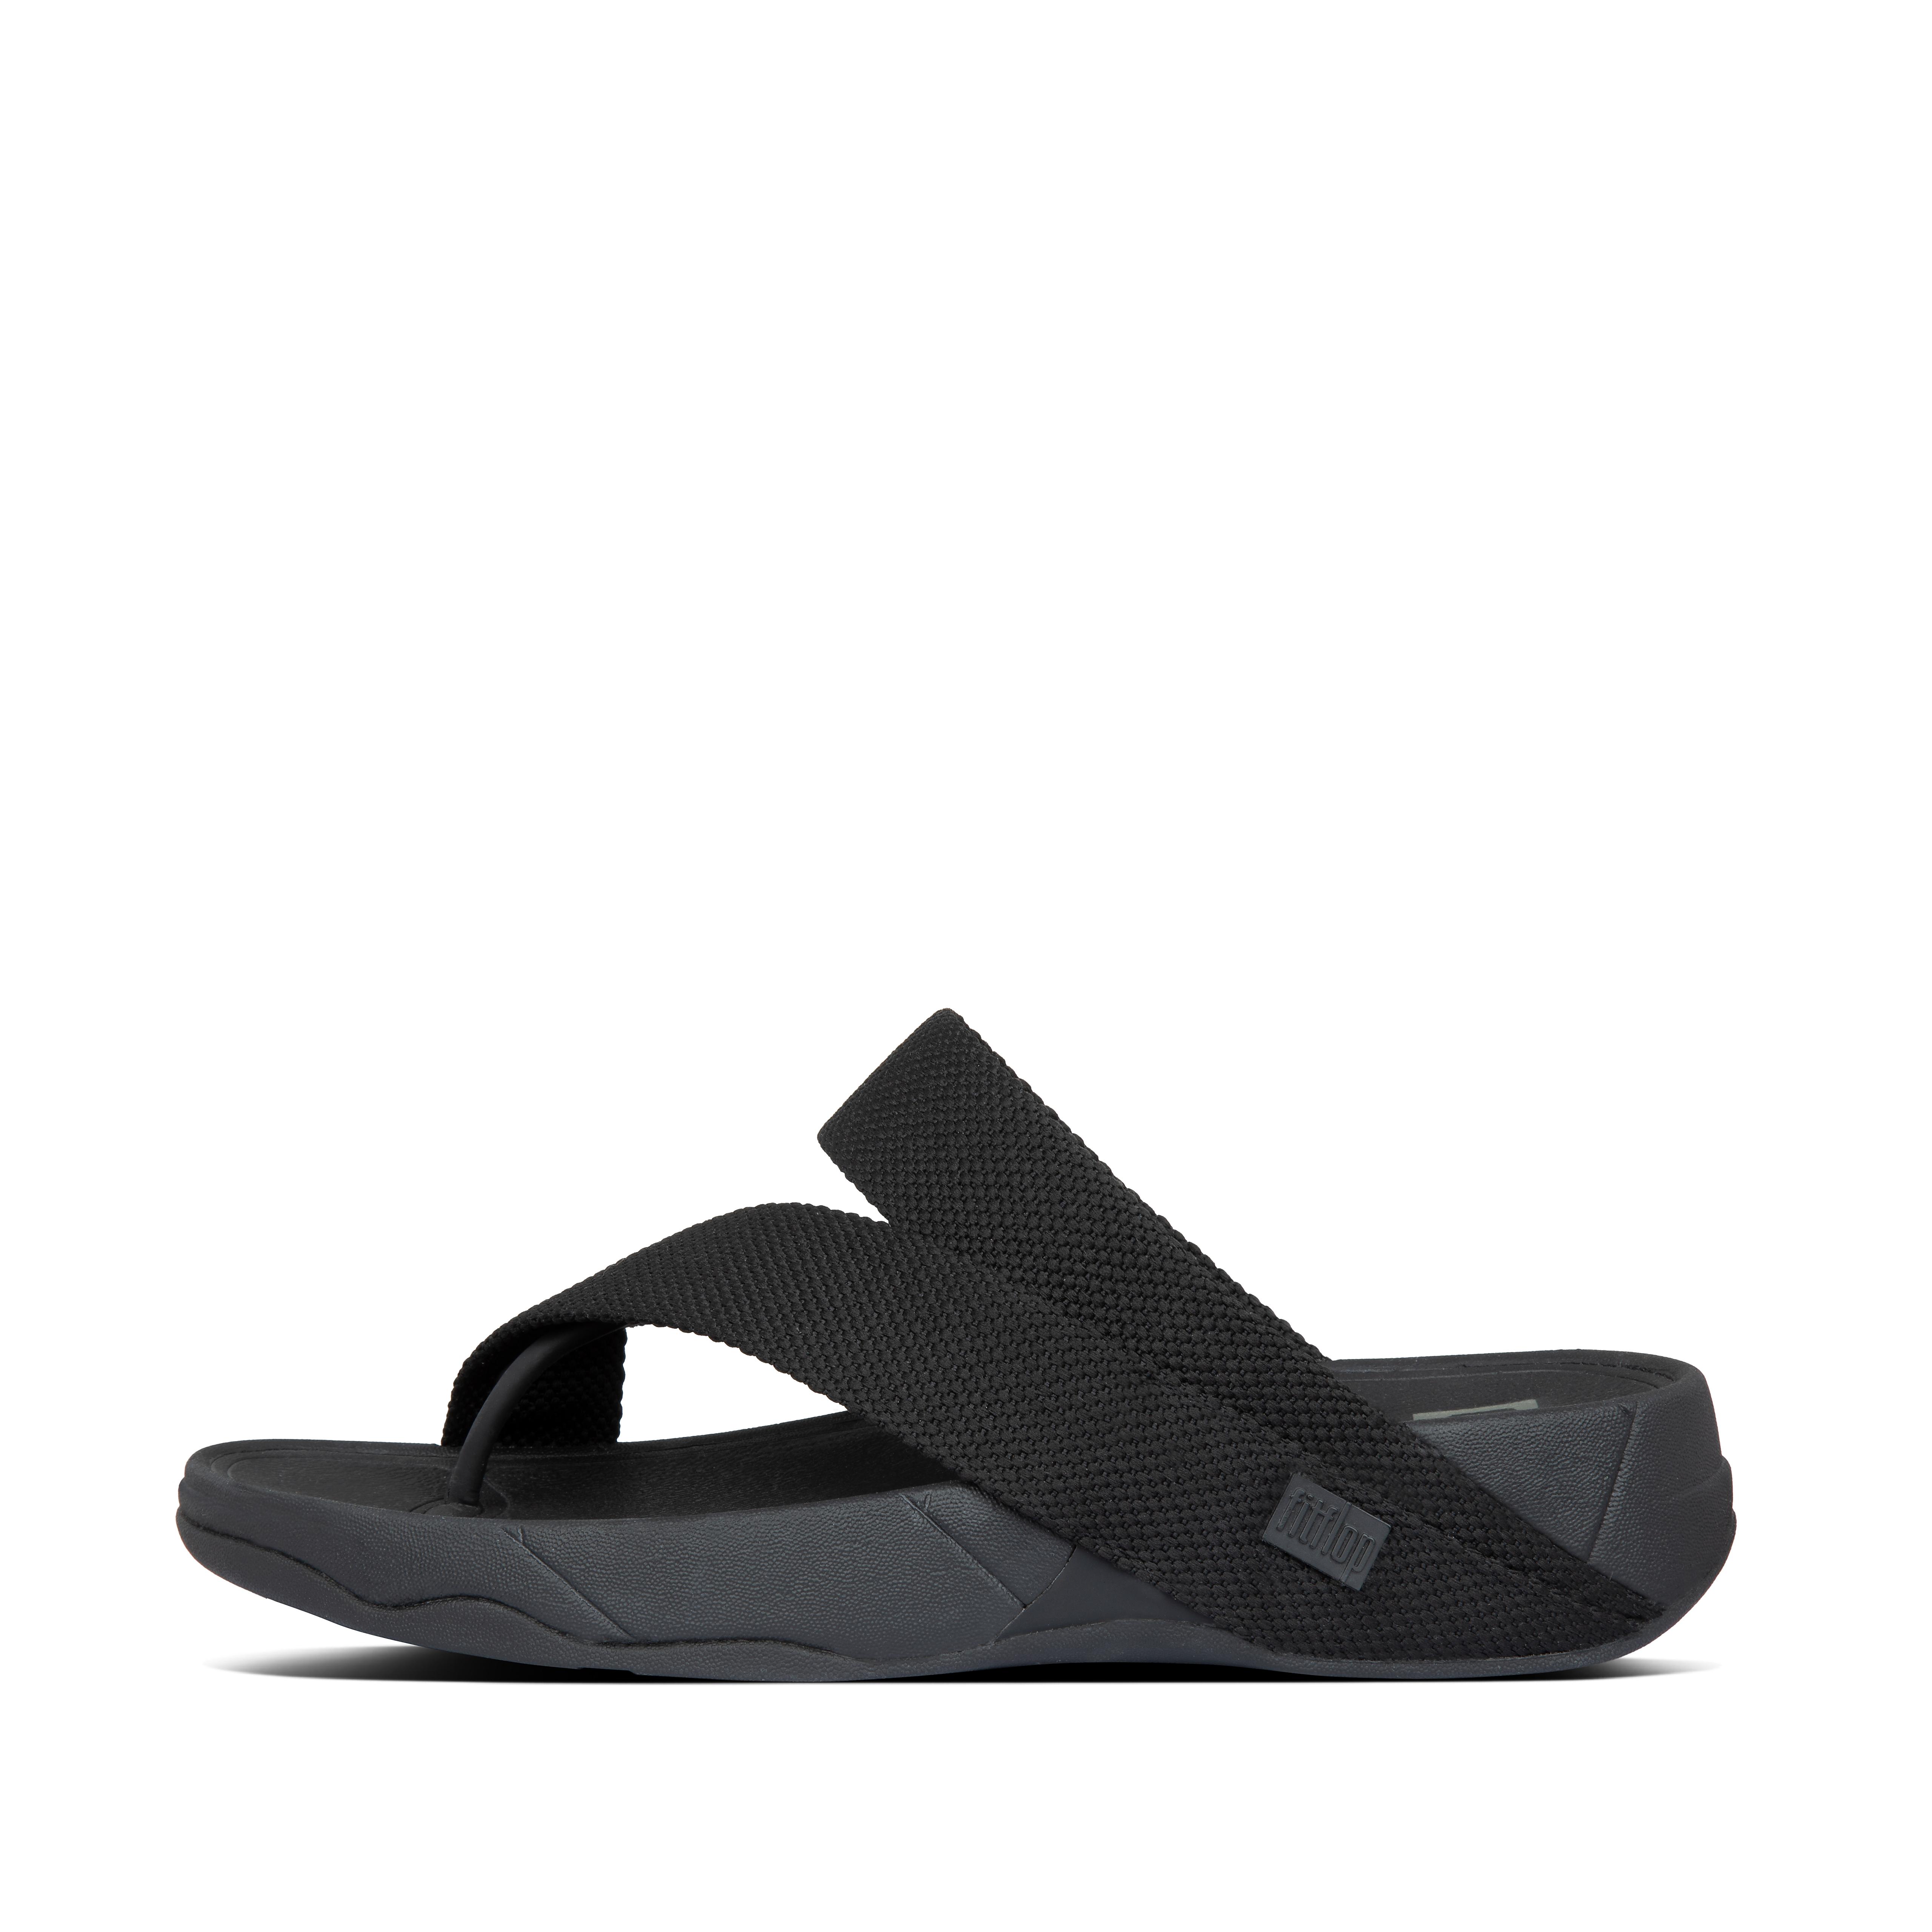 fitflop mens slippers uk